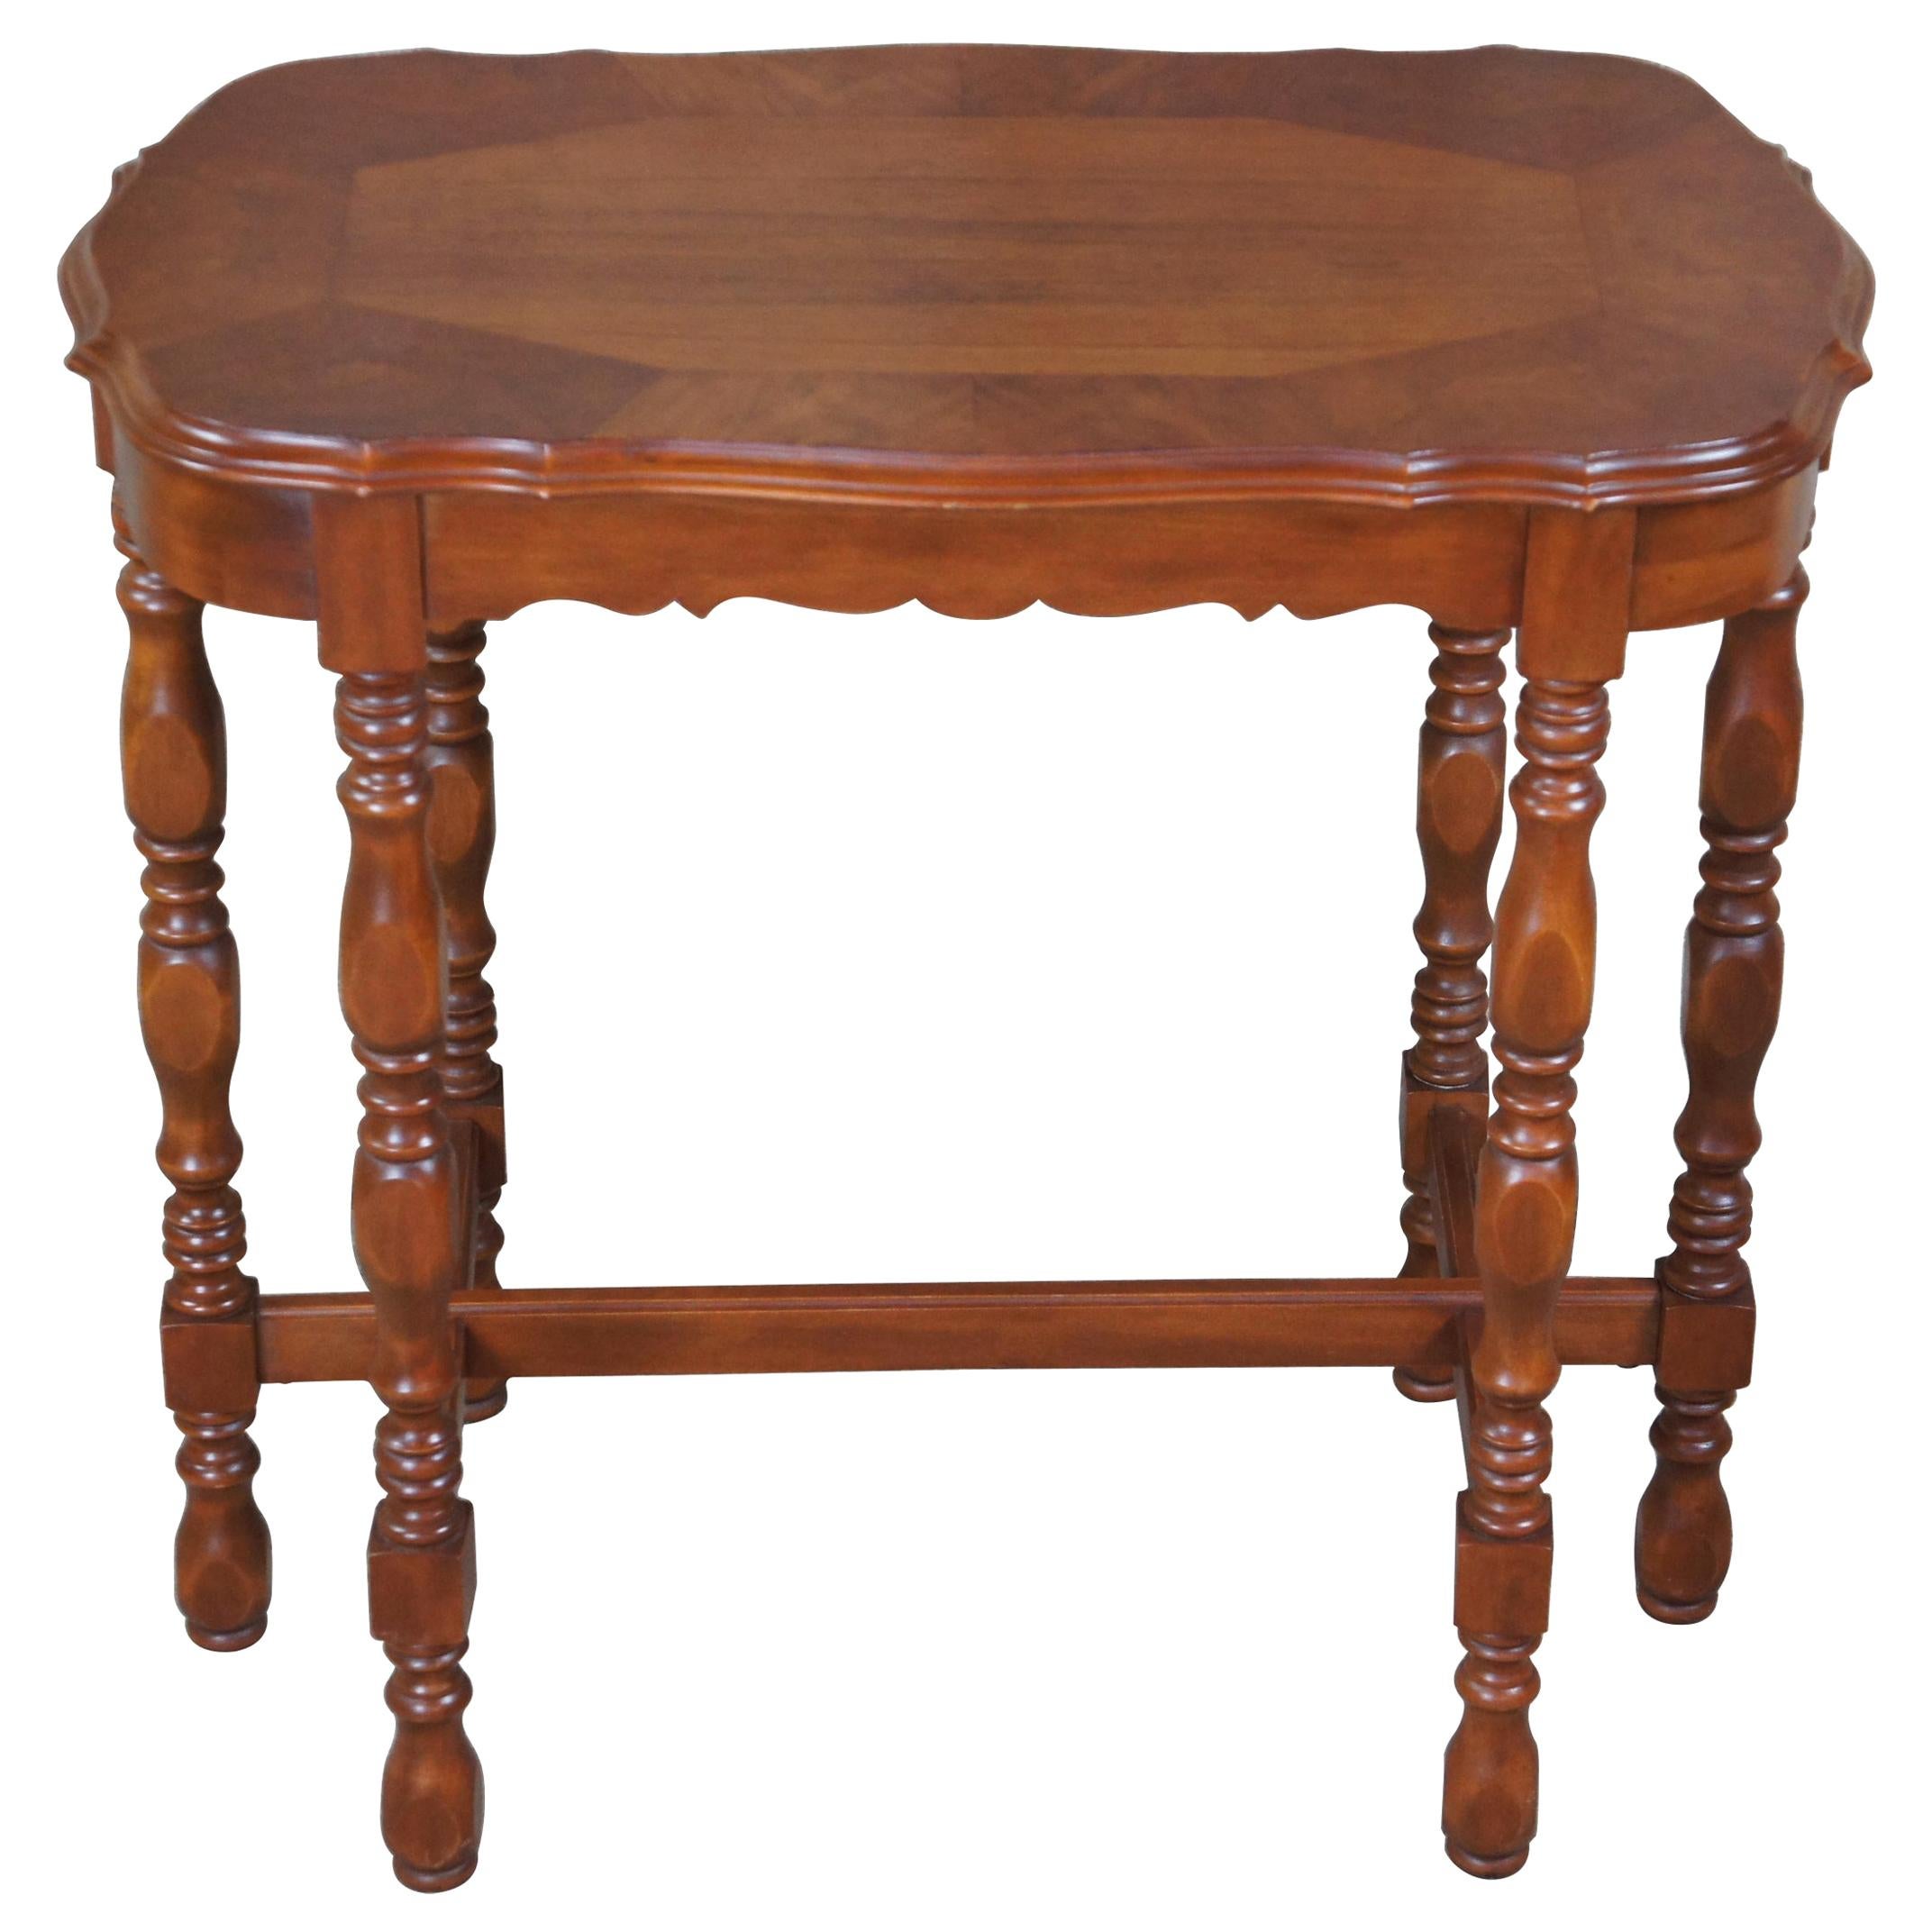 Vintage Jacobean Walnut Rectangular Scalloped Side End Accent Parlor Table